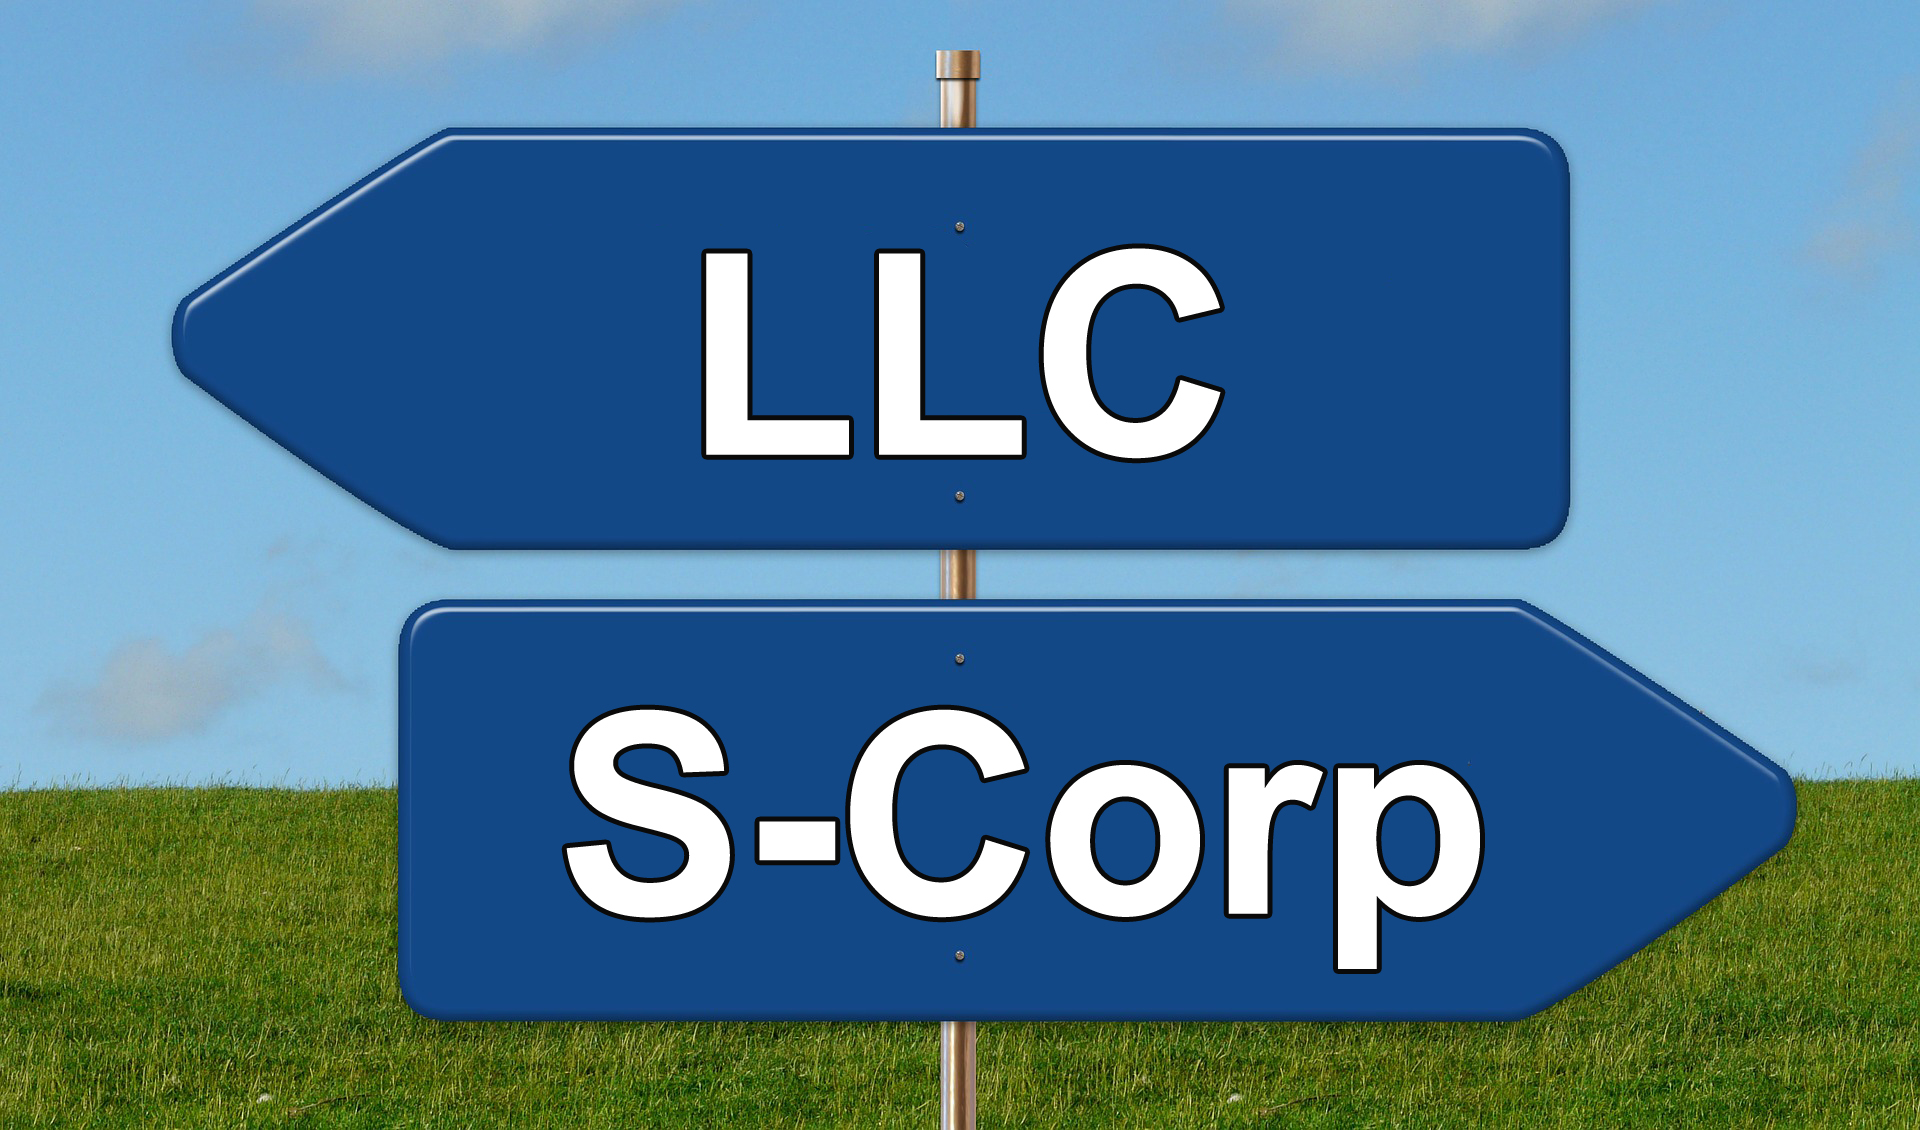 llc and s-corp